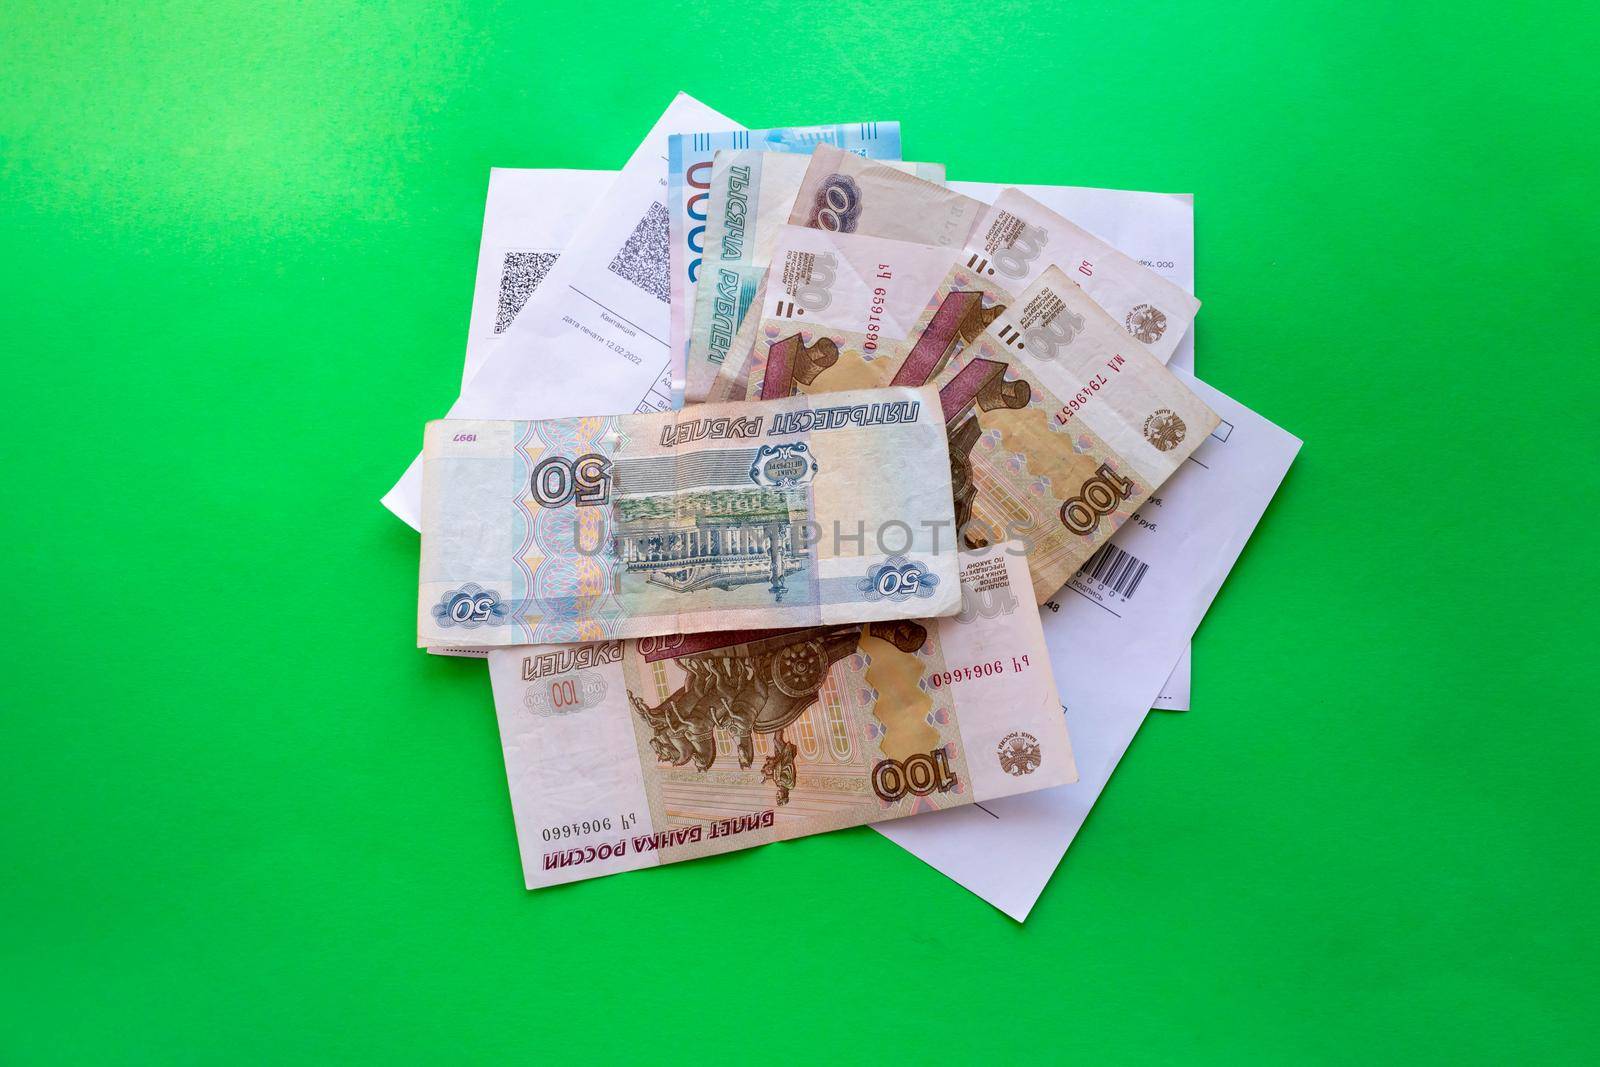 There is a stack of Russian banknotes on the receipts. A bundle of Russian money on a green background by lapushka62